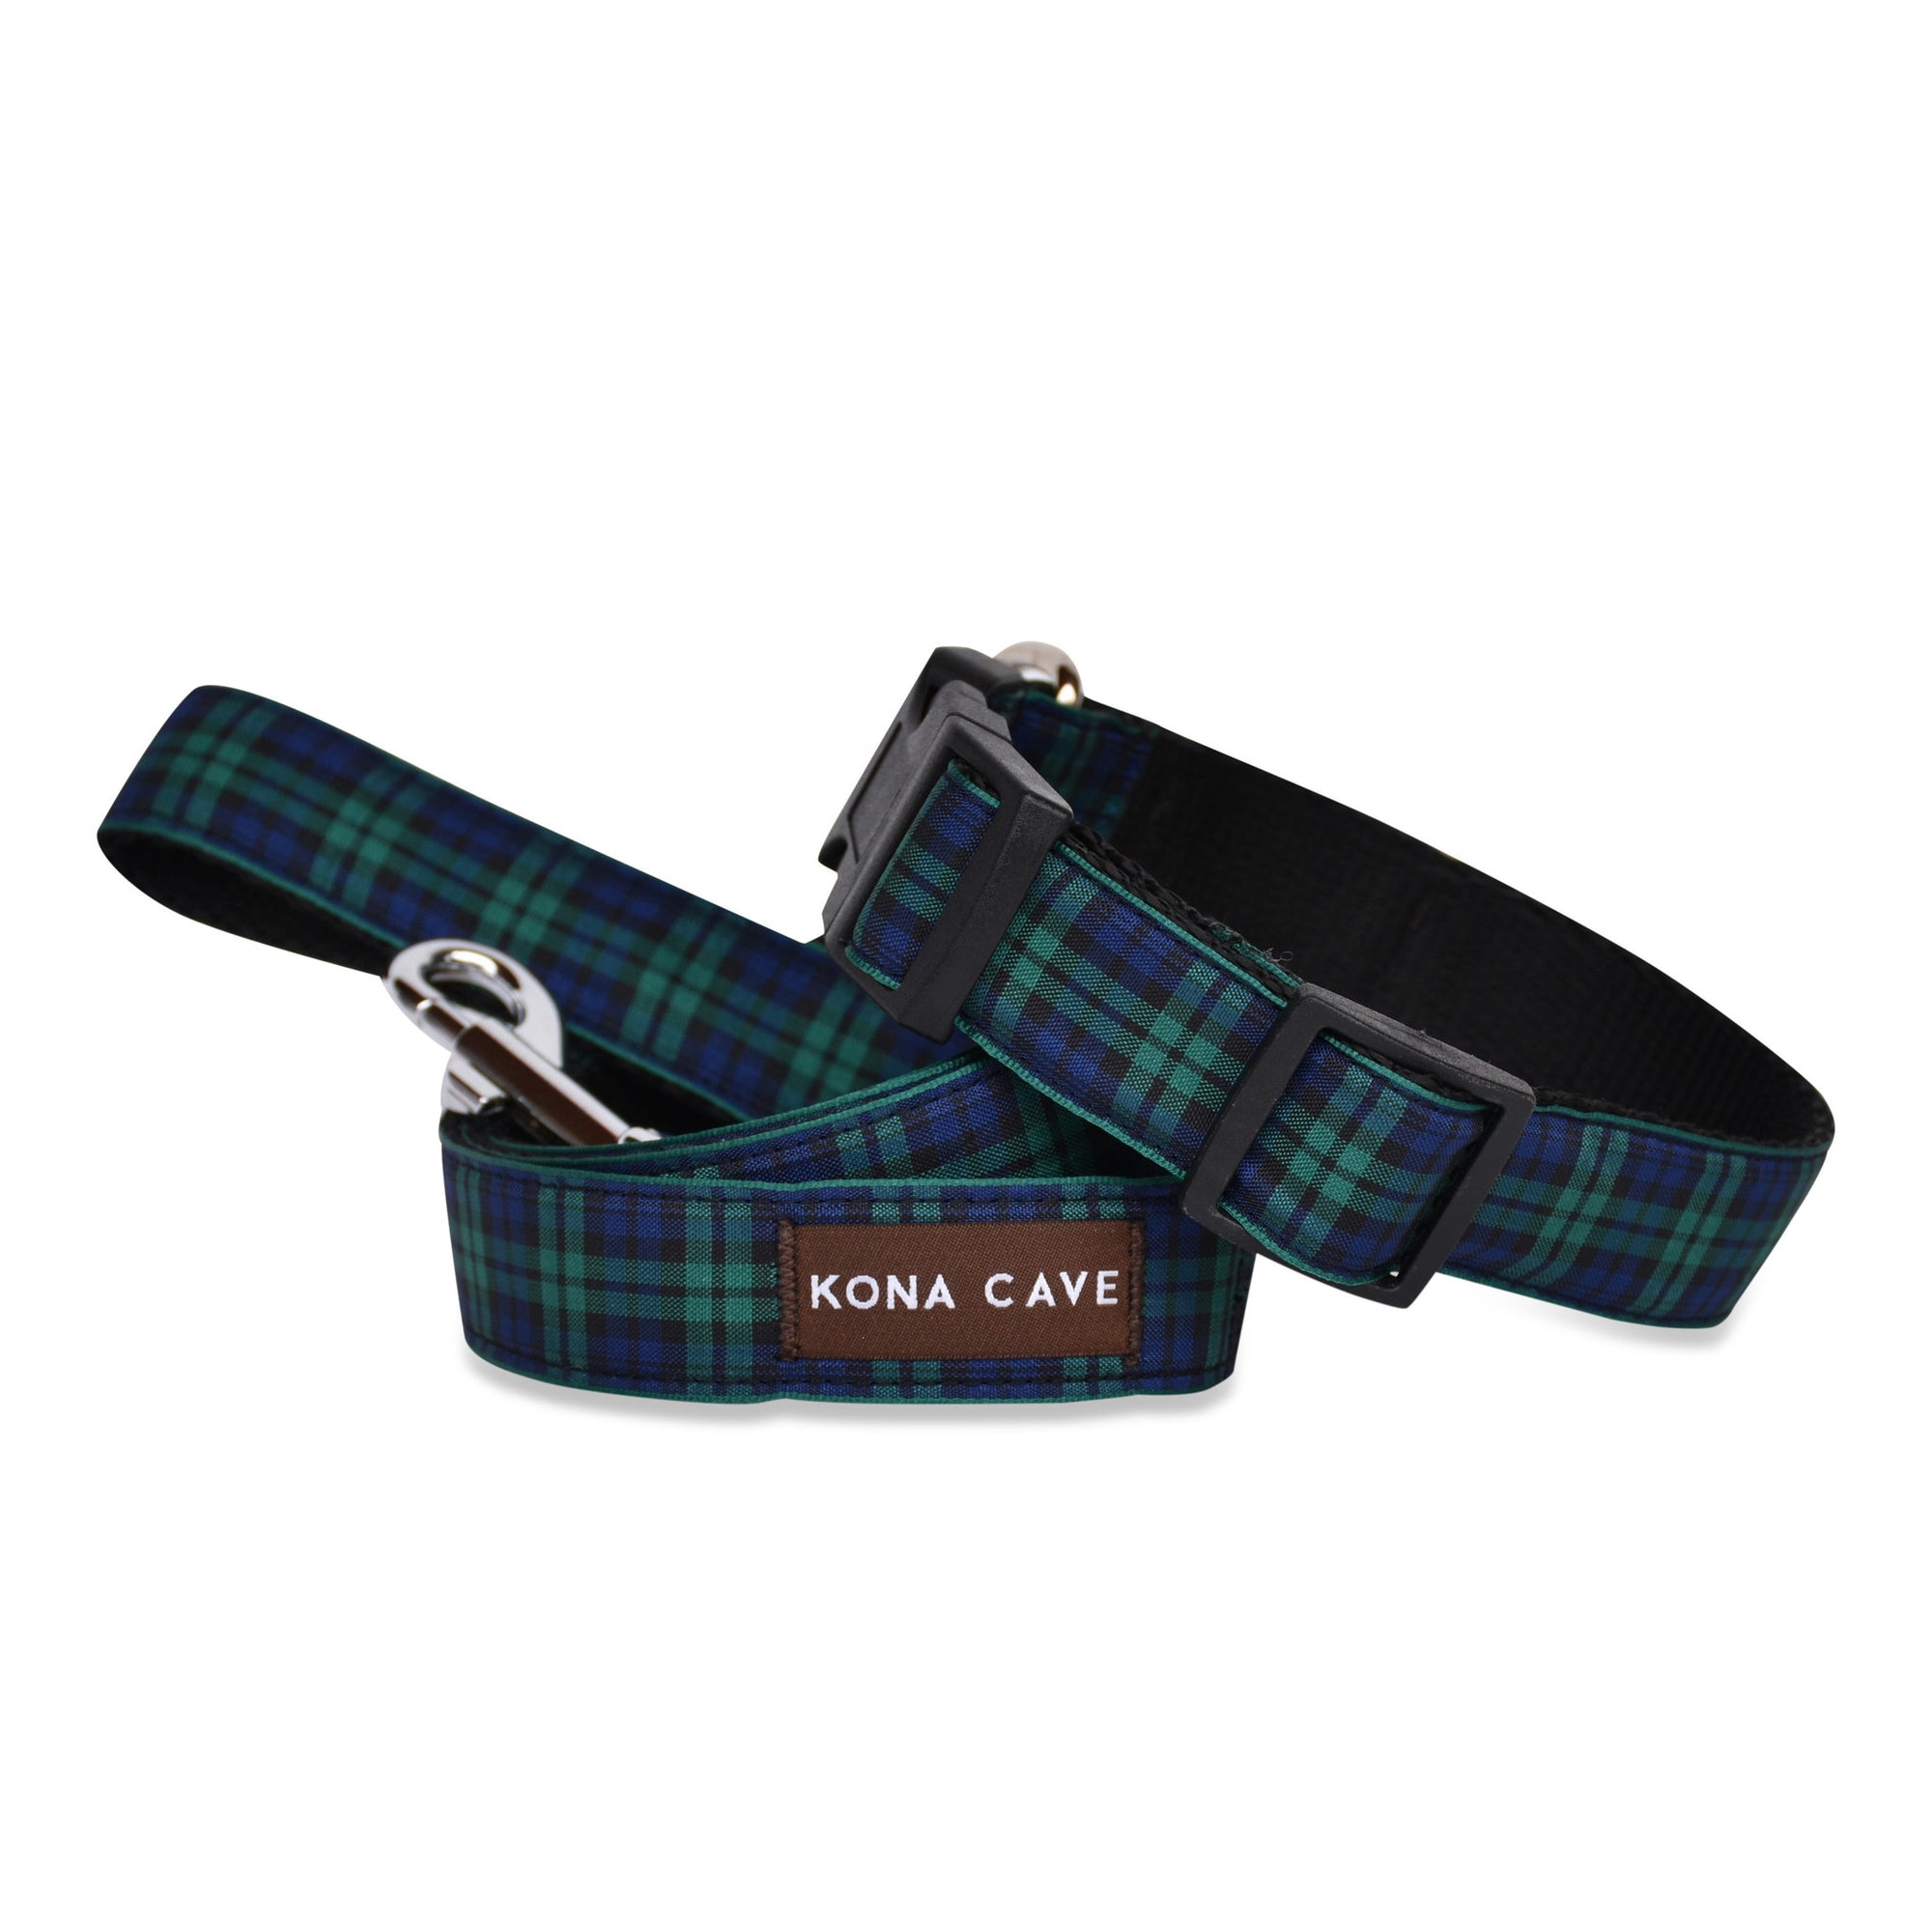 KONA CAVE ® - adjustable size dog collar and lead in authentic Blackwatch tartan (blue/green)